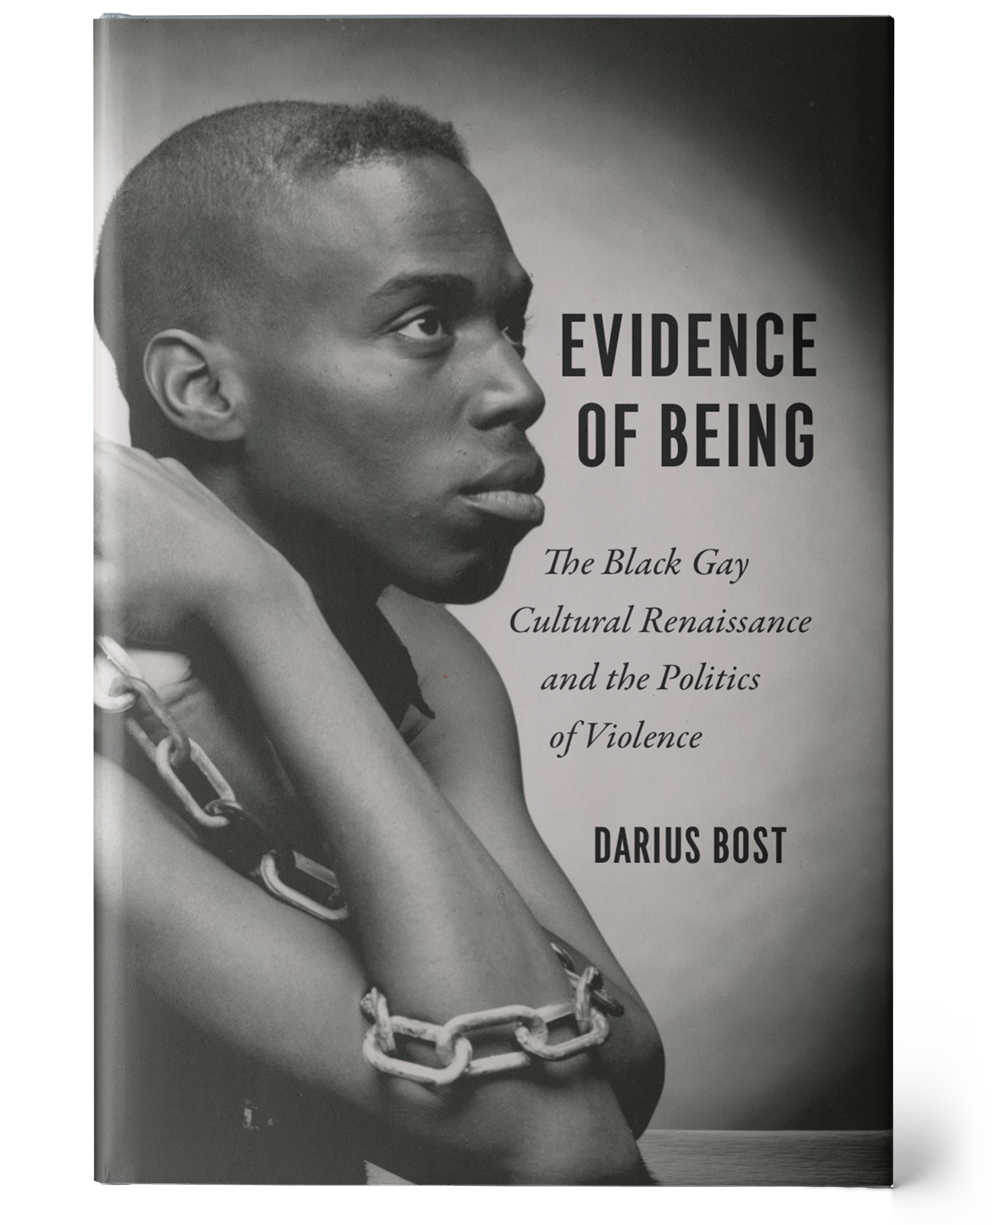 a black and white book cover. On the left side of the cover, a young Black man is resting his elbows on a table and looking off to the right, slightly upwards. A linked chain is wrapped around his right arm and clutched in his hands. To the right, the title and author's name are shown in black: 'Evidence of Being: The Black Gay Cultural Renaissance and the Politics of Violence', 'Darius Bost'.